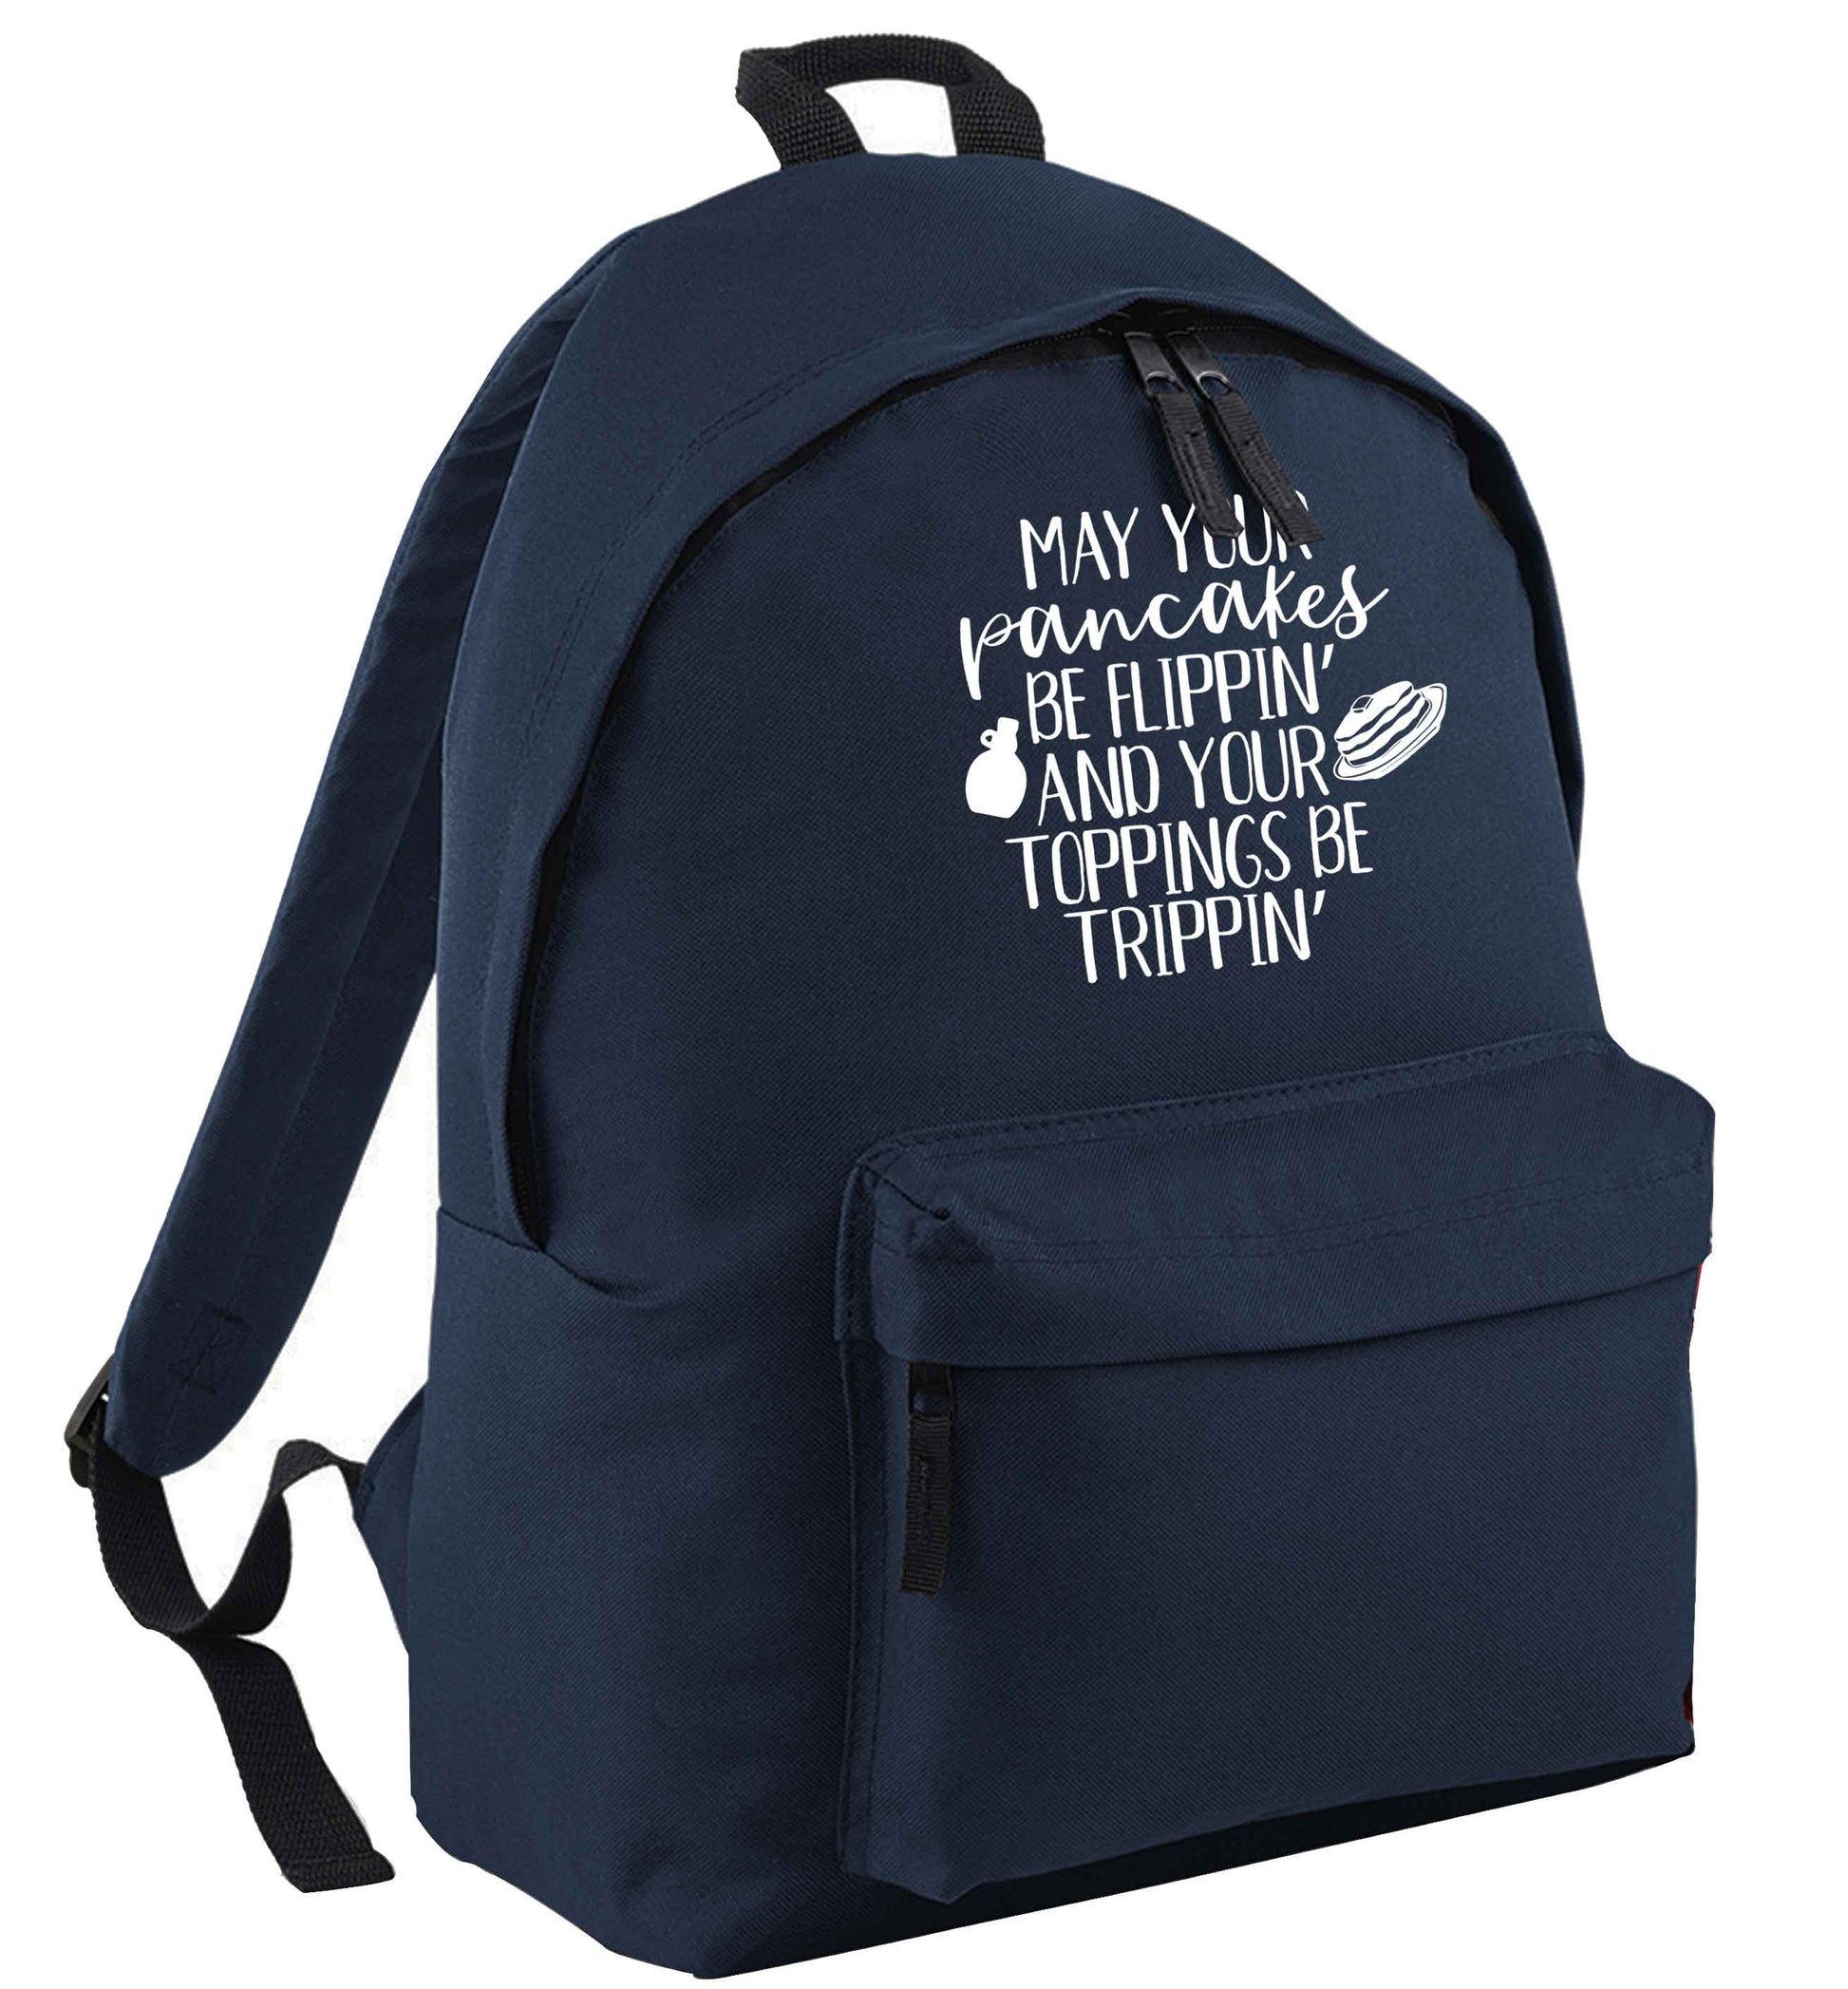 May your pancakes be flippin' and your toppings be trippin' navy childrens backpack